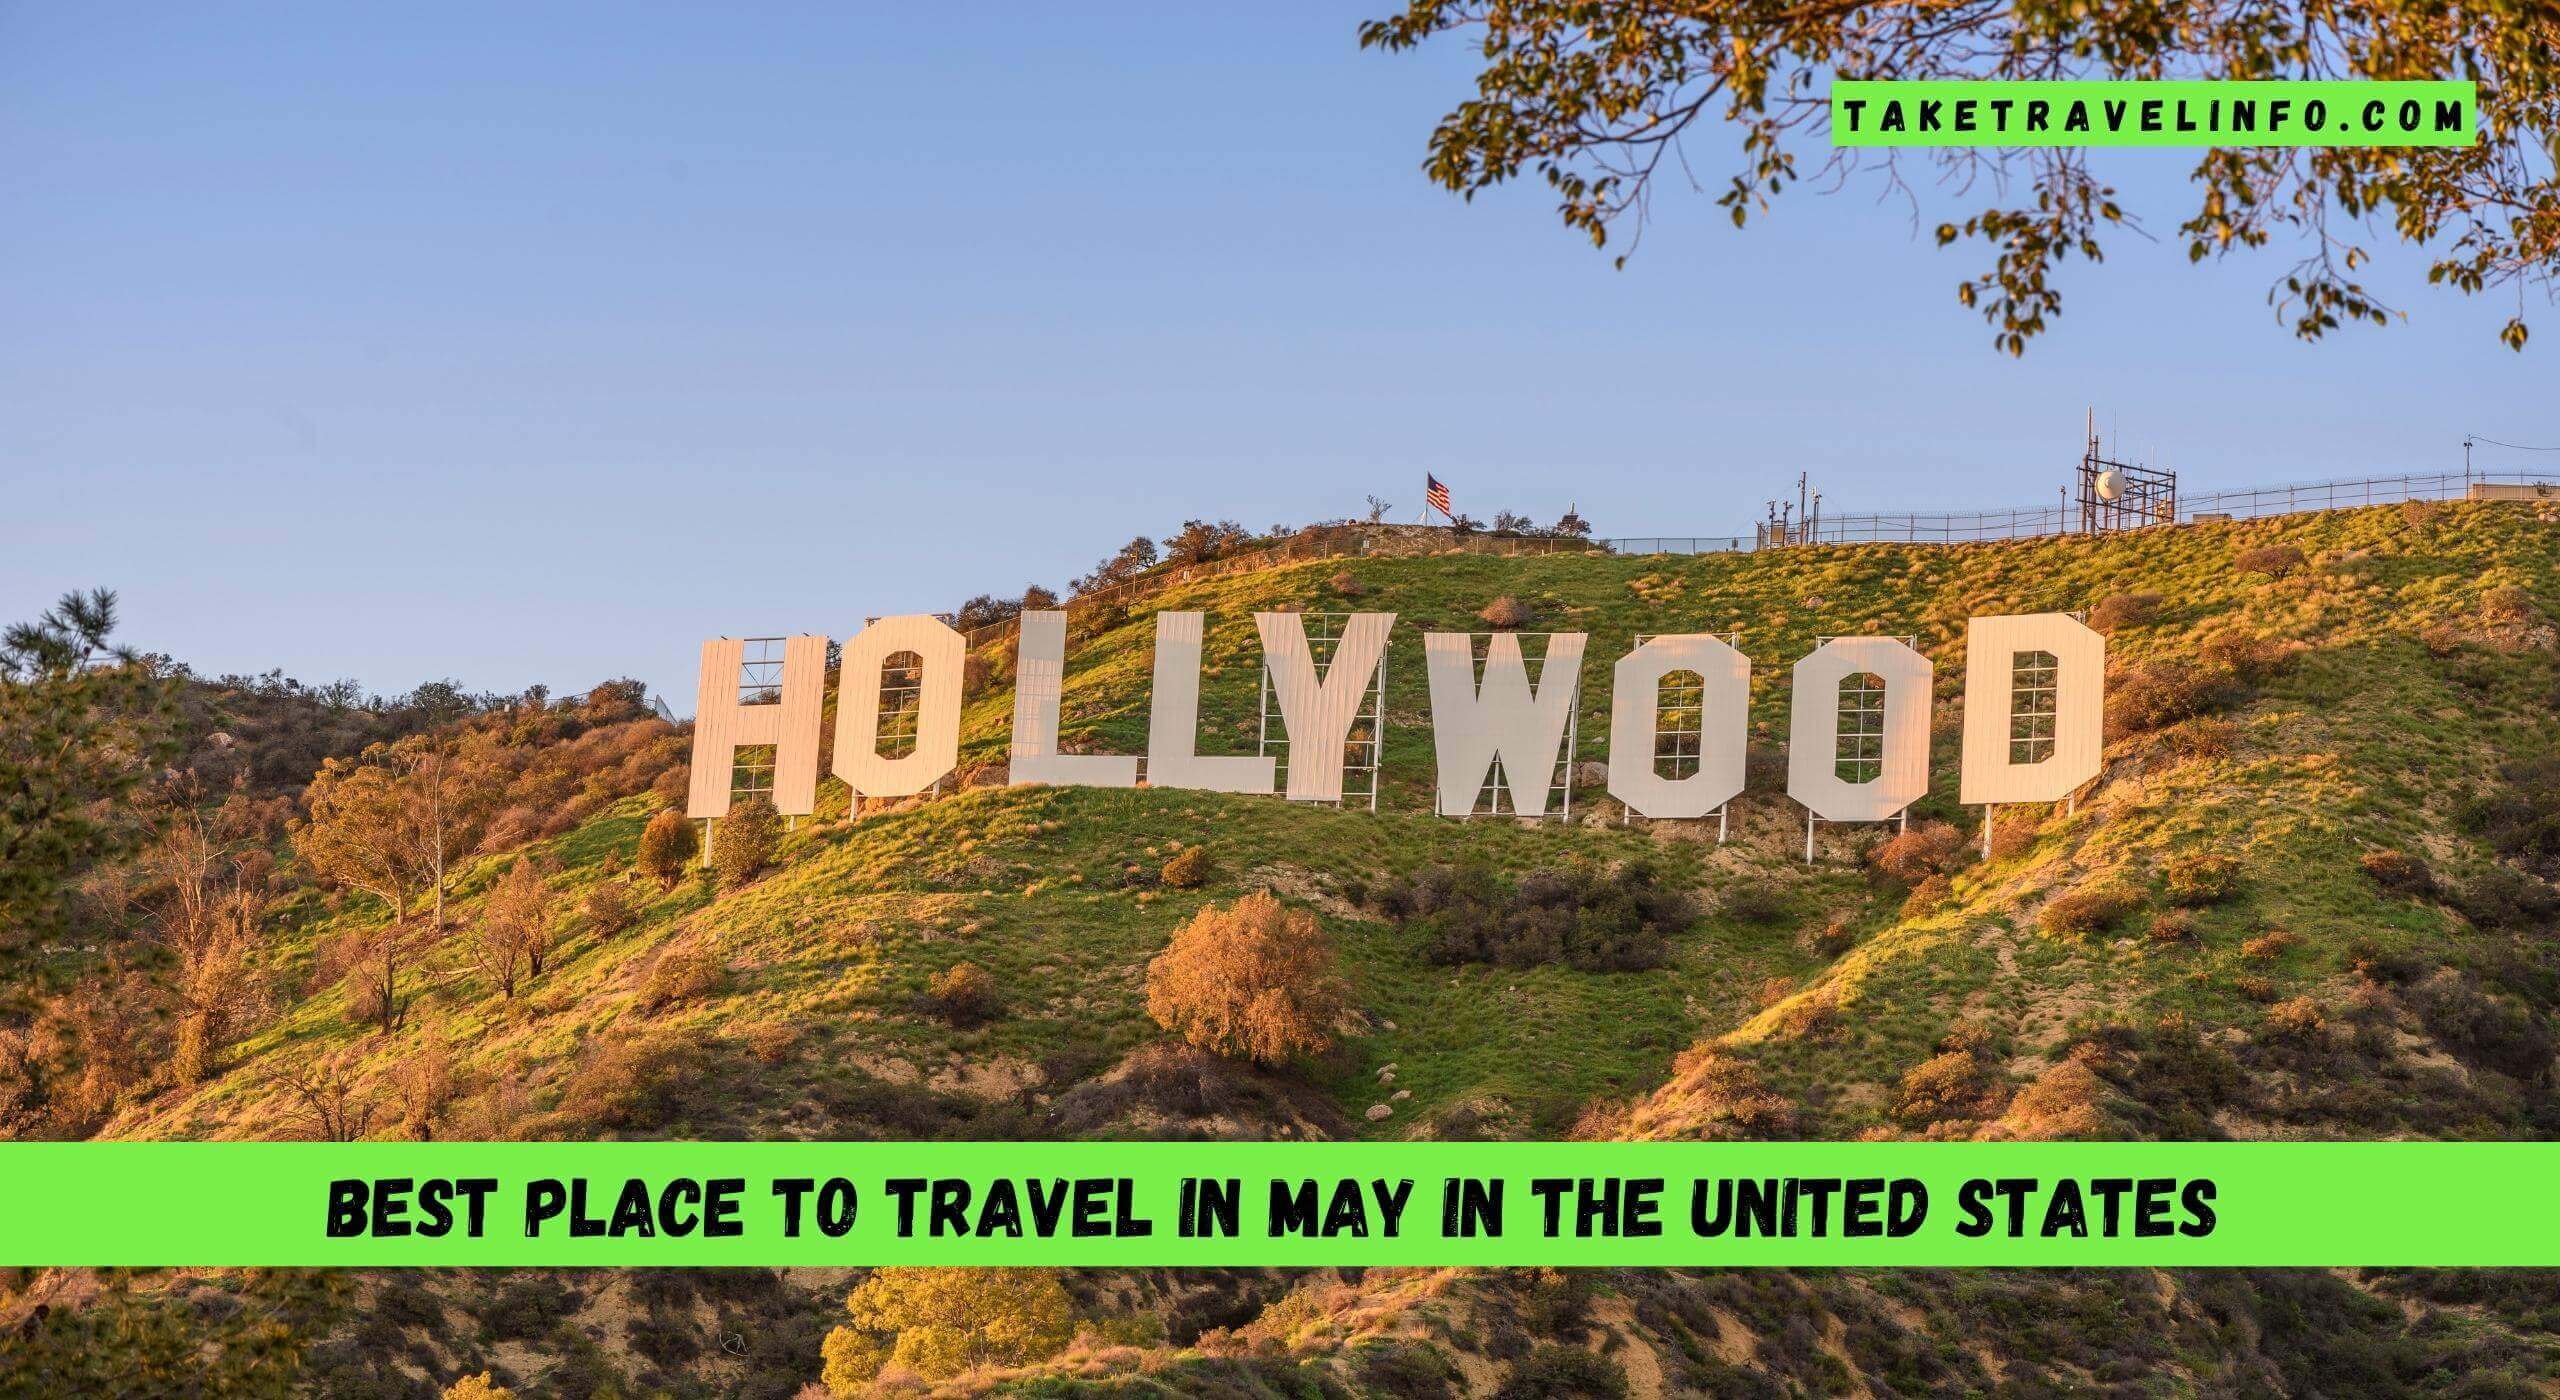 Best Place To Travel In May In The United States